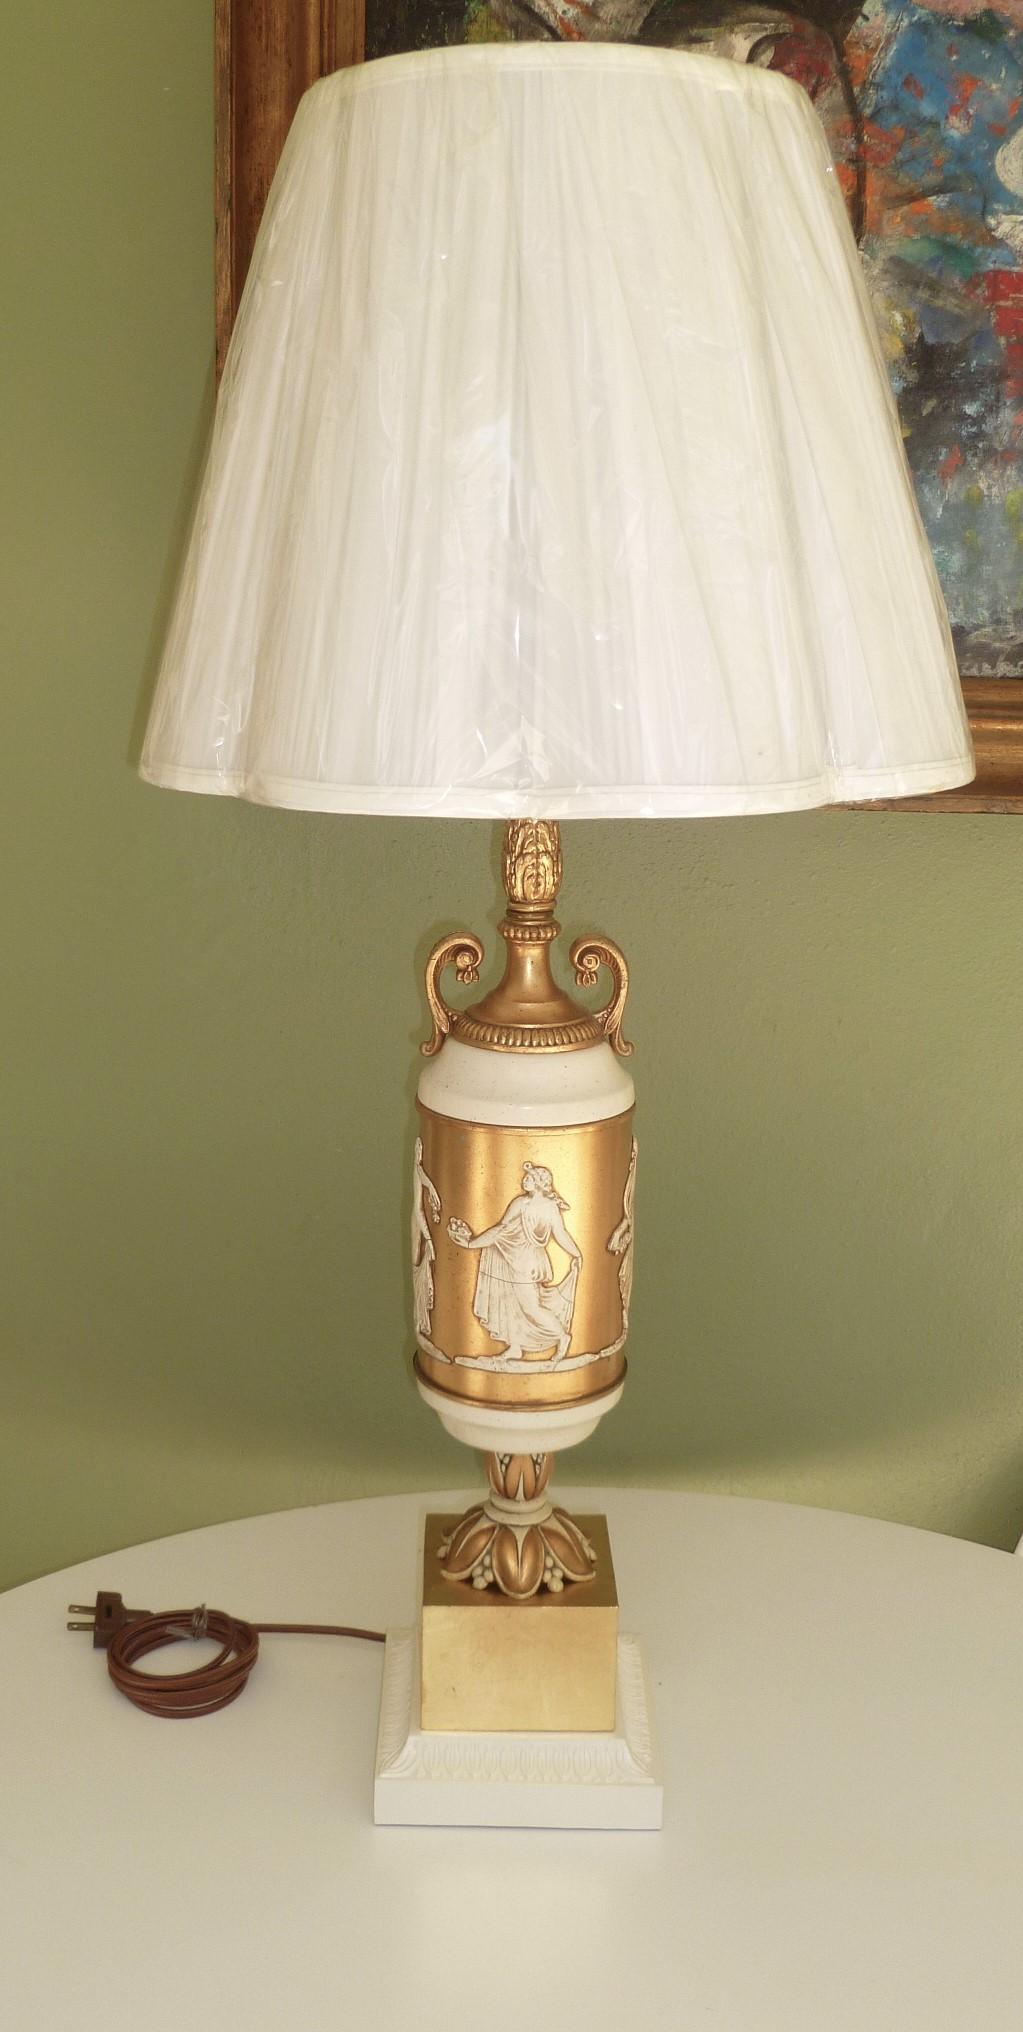 REDUCED FROM $2,500.....A pair of 1940s French parcel-gilt classical urn form table lamps with classical Greek Muses of the arts in relief around the center of the forms. Gilt metal and creamy white patinated, the lamps are rewired with three level